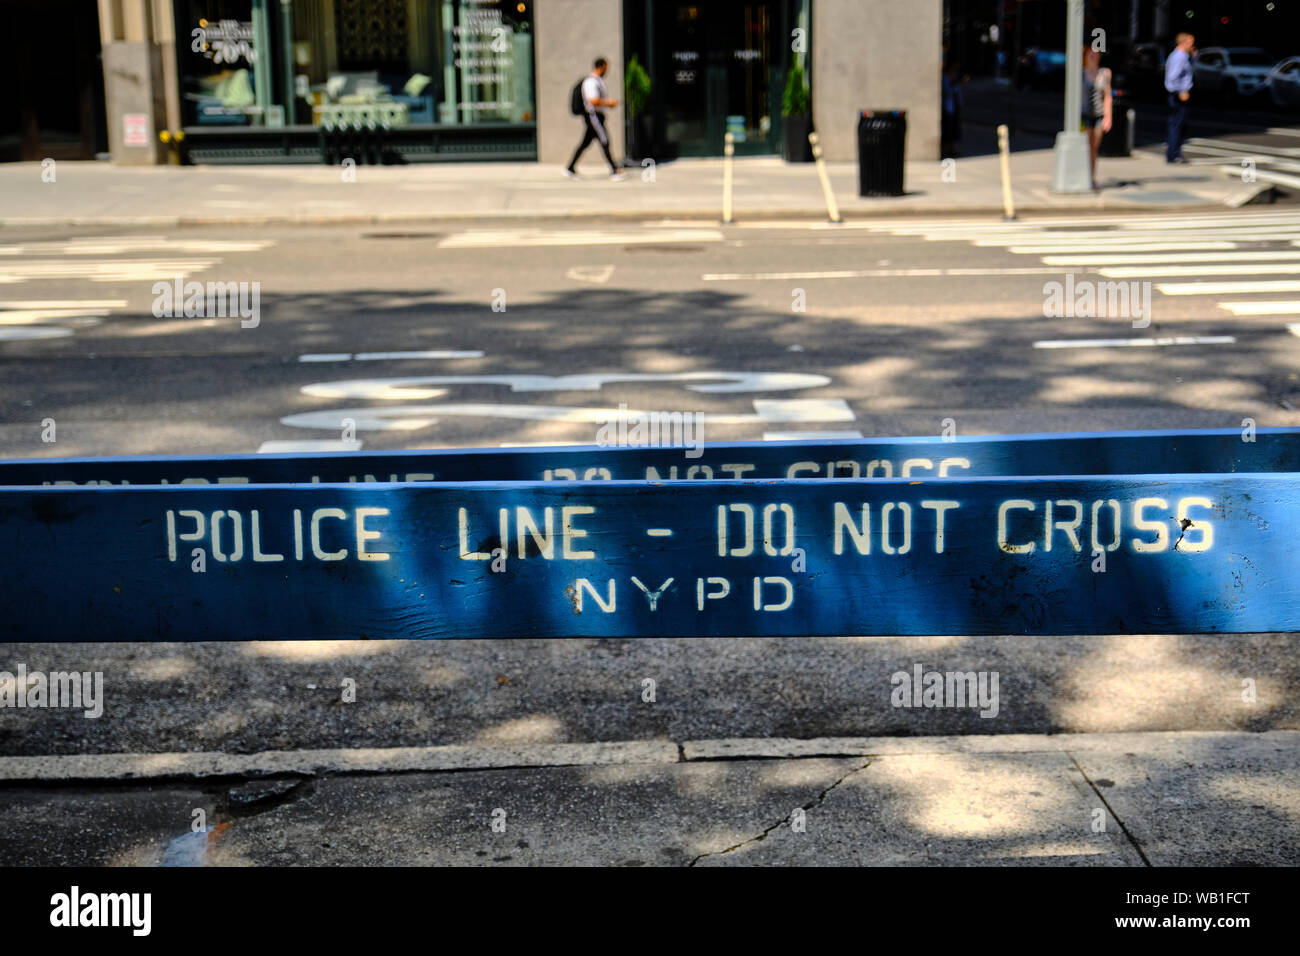 New York Police (NYPD), Police Line - 'Do Not Cross' barrier. Stock Photo